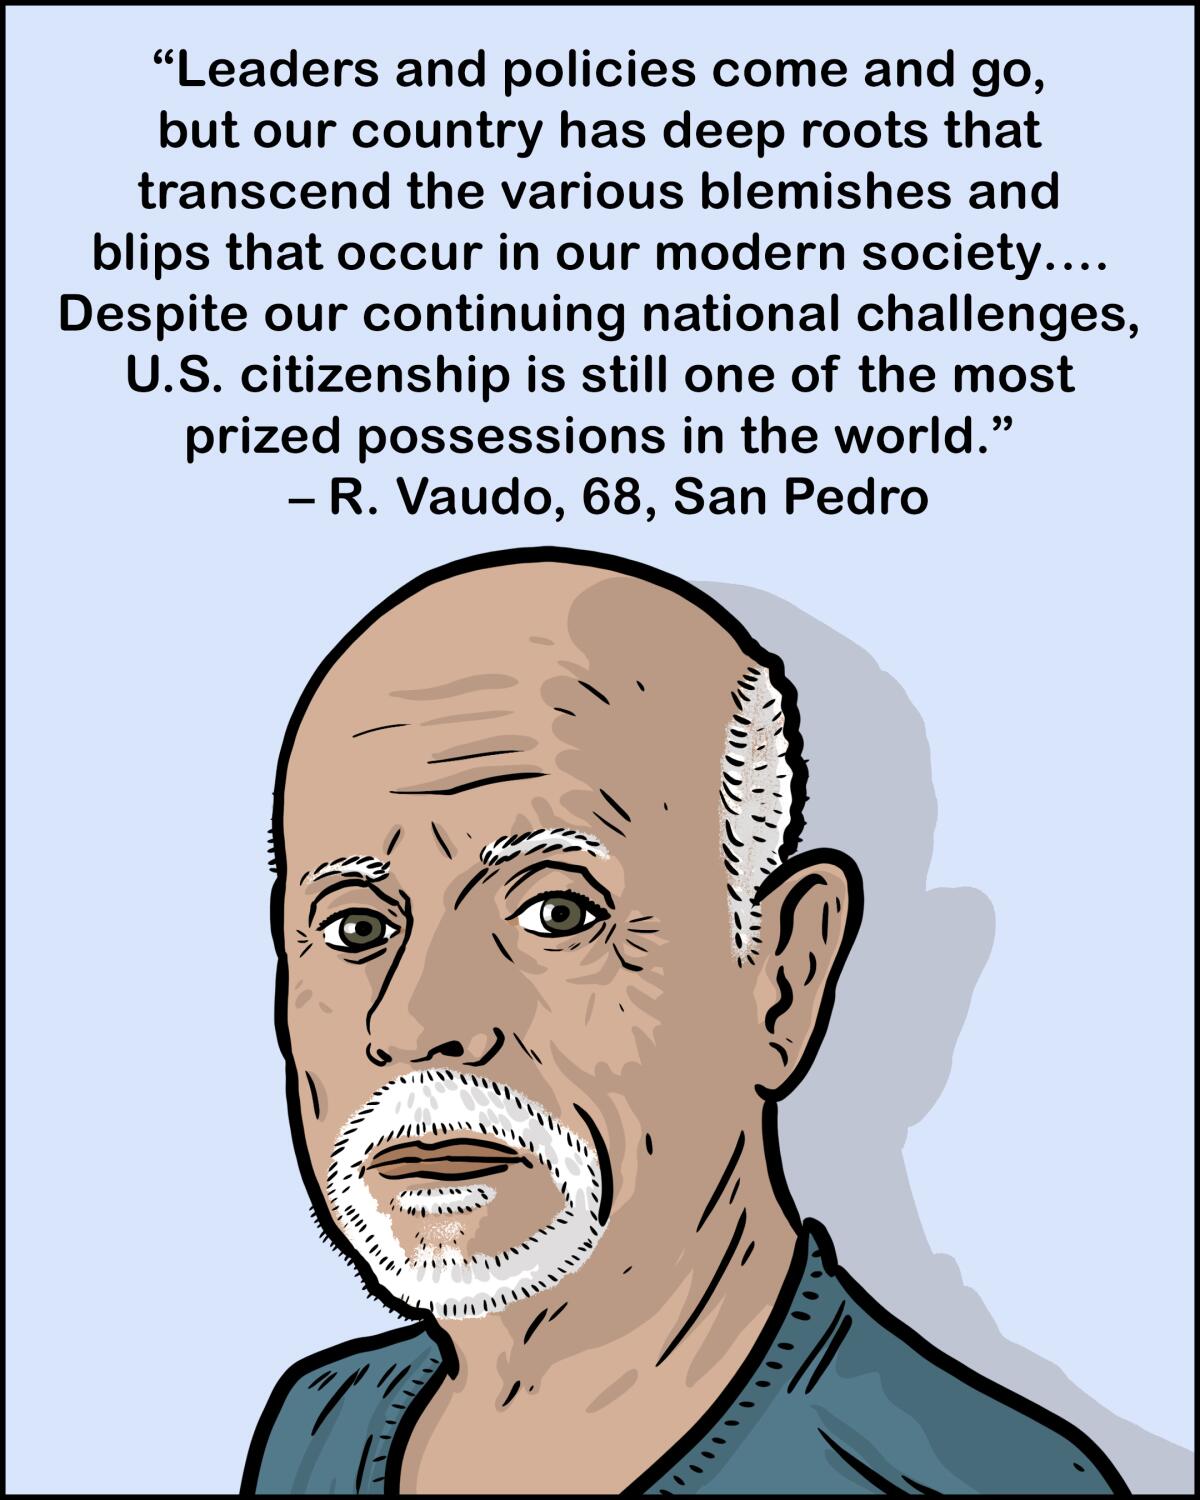 Despite our continuing national challenges, US citizenship is still a prized possession in the world. -R Vaudo, 68, San Pedro